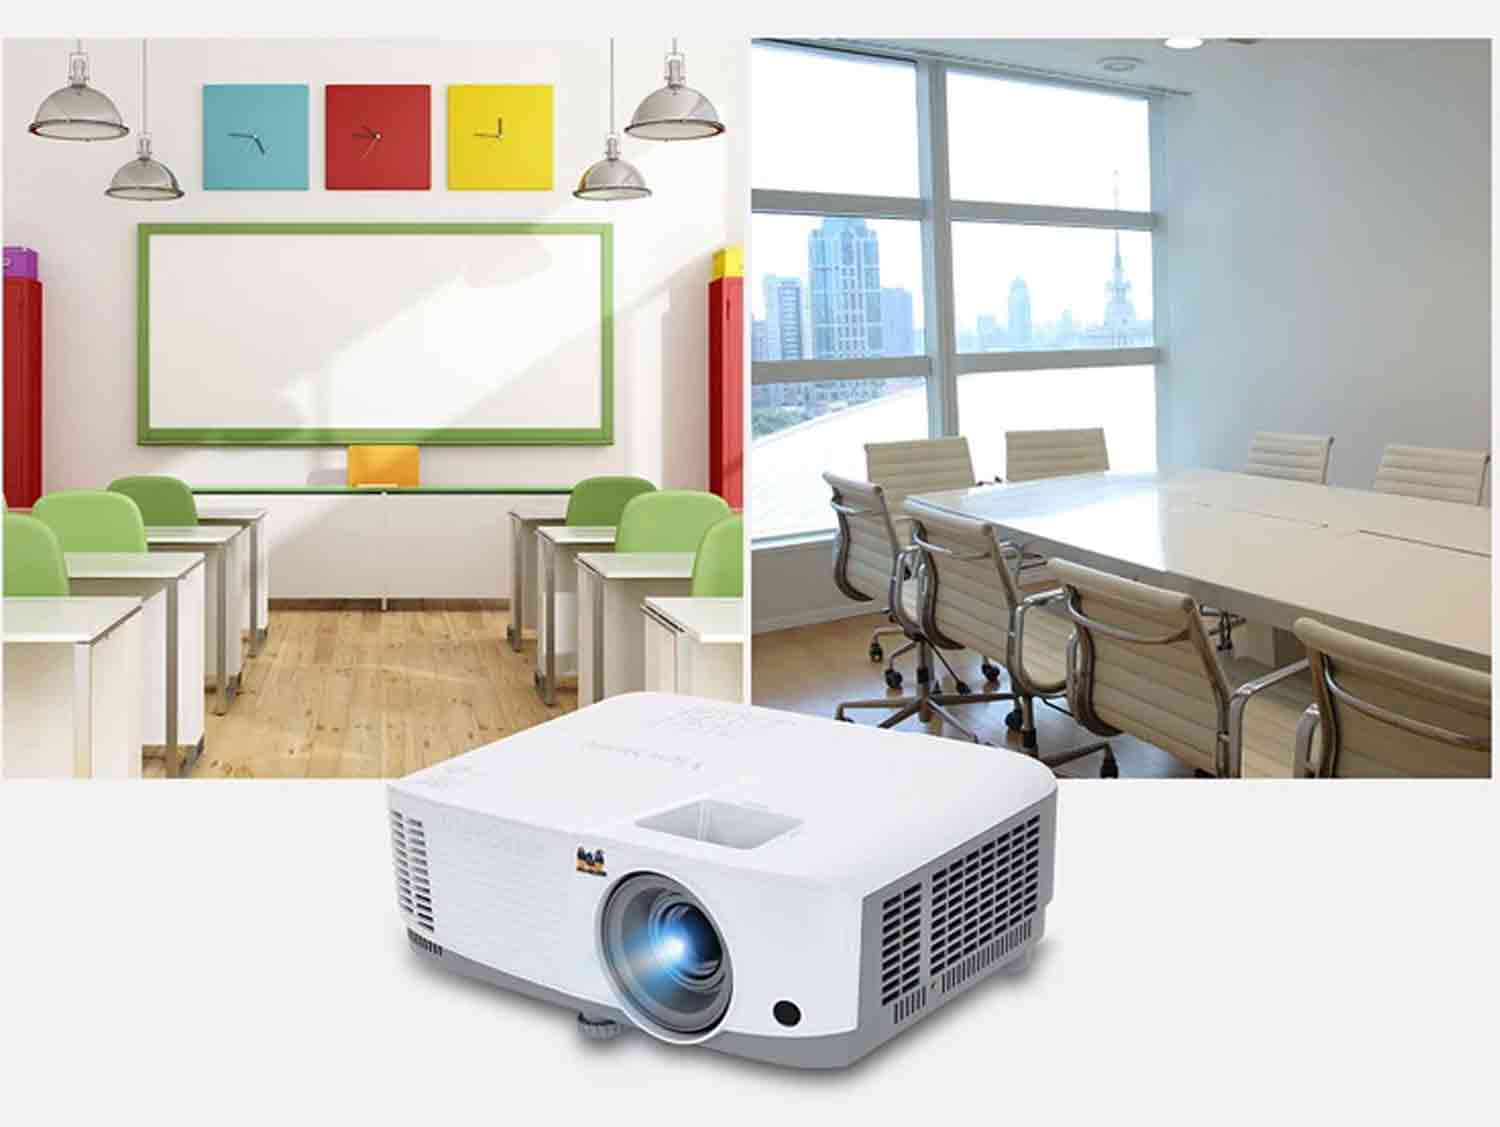 Rent the ViewSonic PA-503XE 4000 Lumens XGA Projector in Sri Lanka for weddings, corporate events, and more. Bright, clear visuals for any occasion.